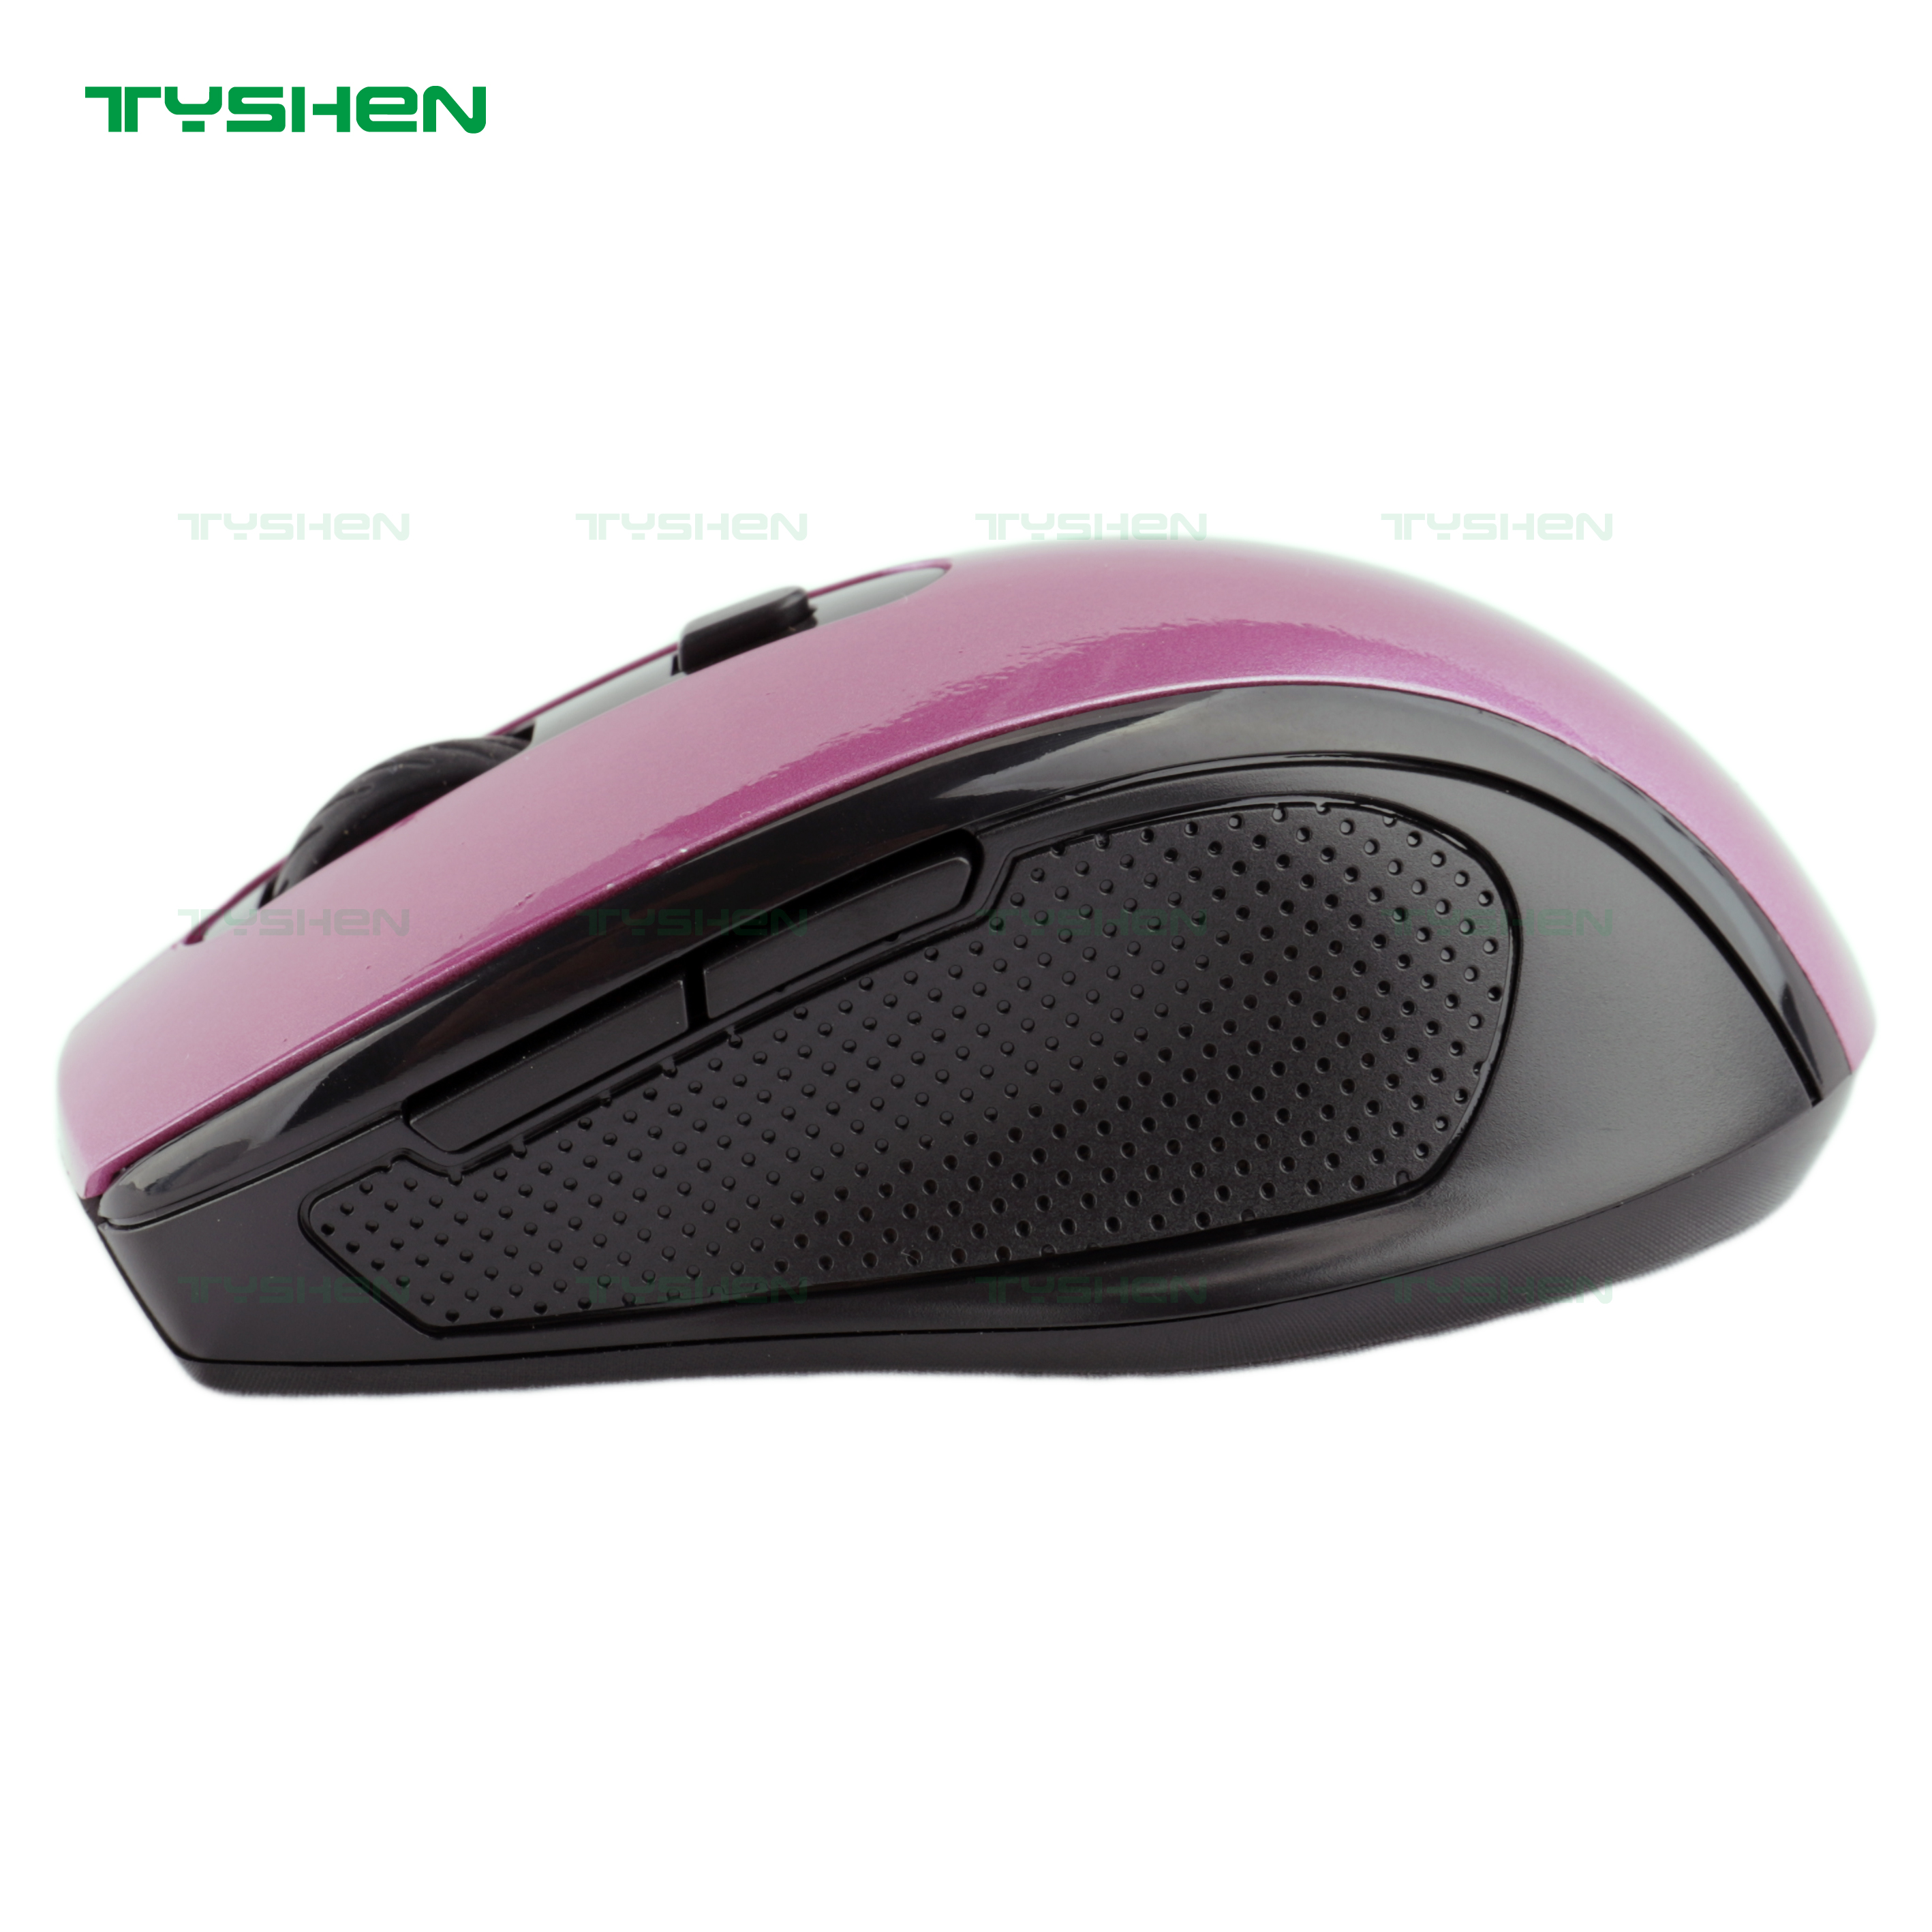 Wireless Mouse,6 Buttons,800/1200/1600 DPI,With Forward&Backward Key,Various Color Available,In Stock,Low MOQ